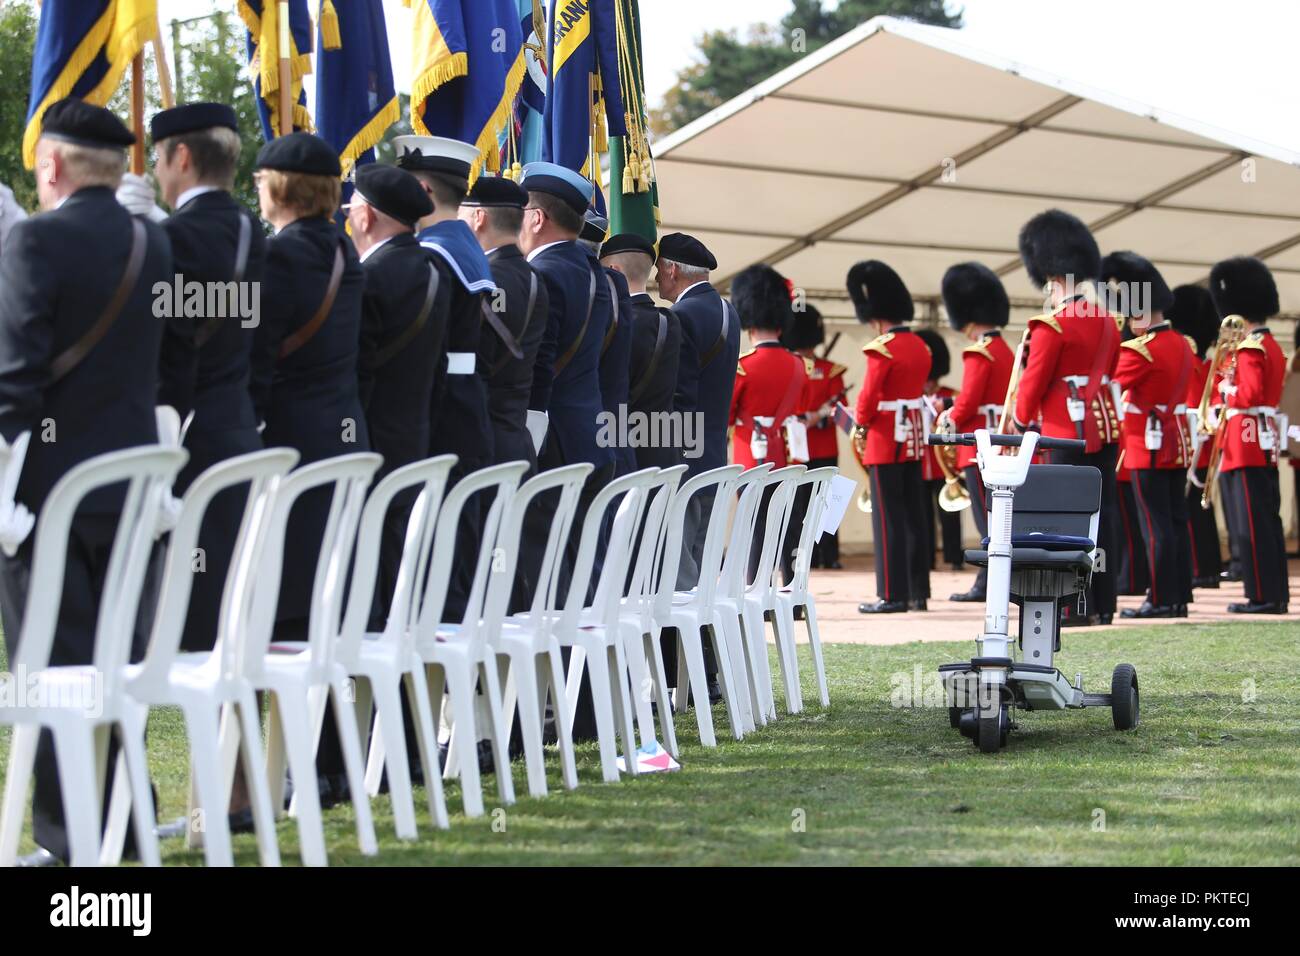 Worcester, Worcestershire, UK. 15th September 2018. A mobility scooter is placed behind elderly ex-servicemen at the Drumhead Service at Gheluvelt Park, Worcester. Peter Lopeman/Alamy Live News Stock Photo